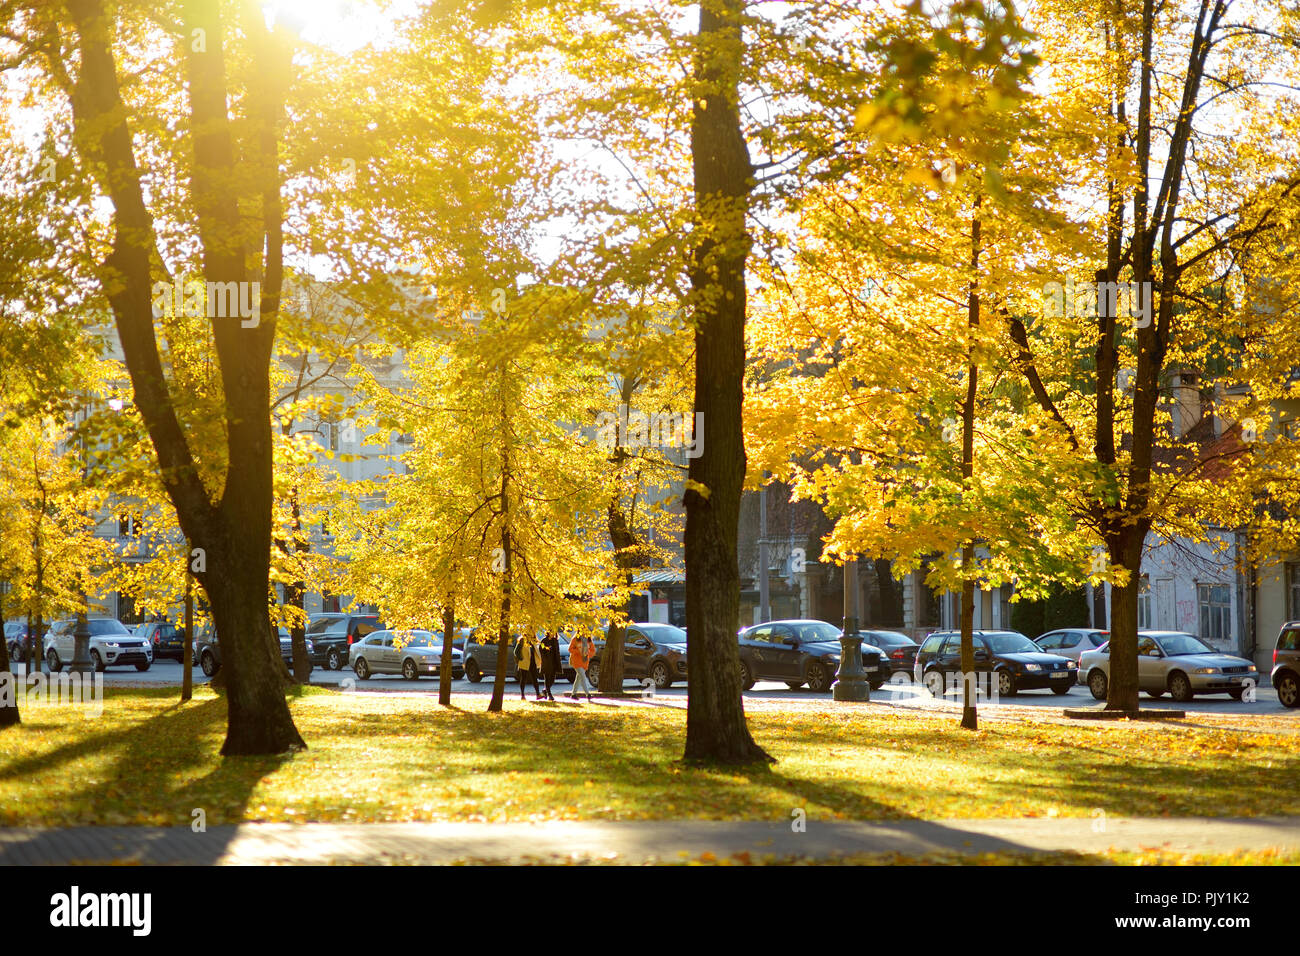 VILNIUS, LITHUANIA - OCTOBER 12, 2017: People walking down the streets of Vilnius Old Town. Beautiful sunny autumn day in the capital of Lithuania. Stock Photo